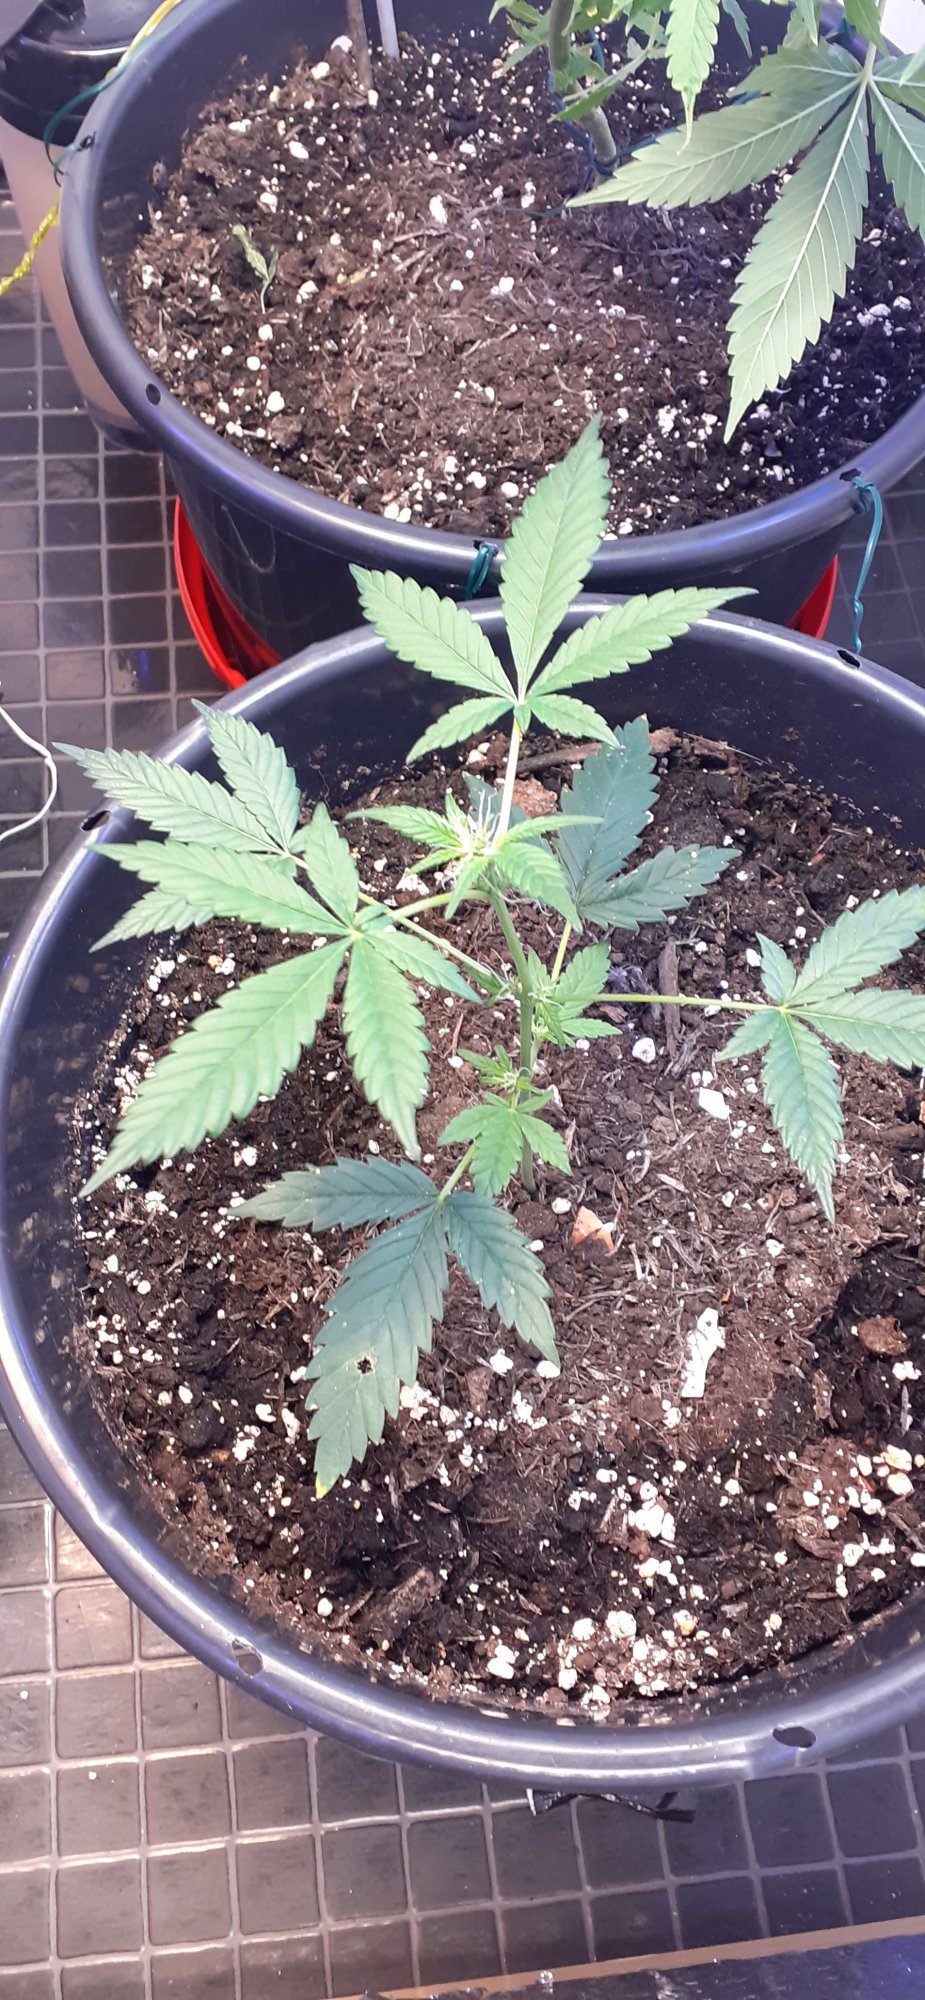 Help needed from a pro grower